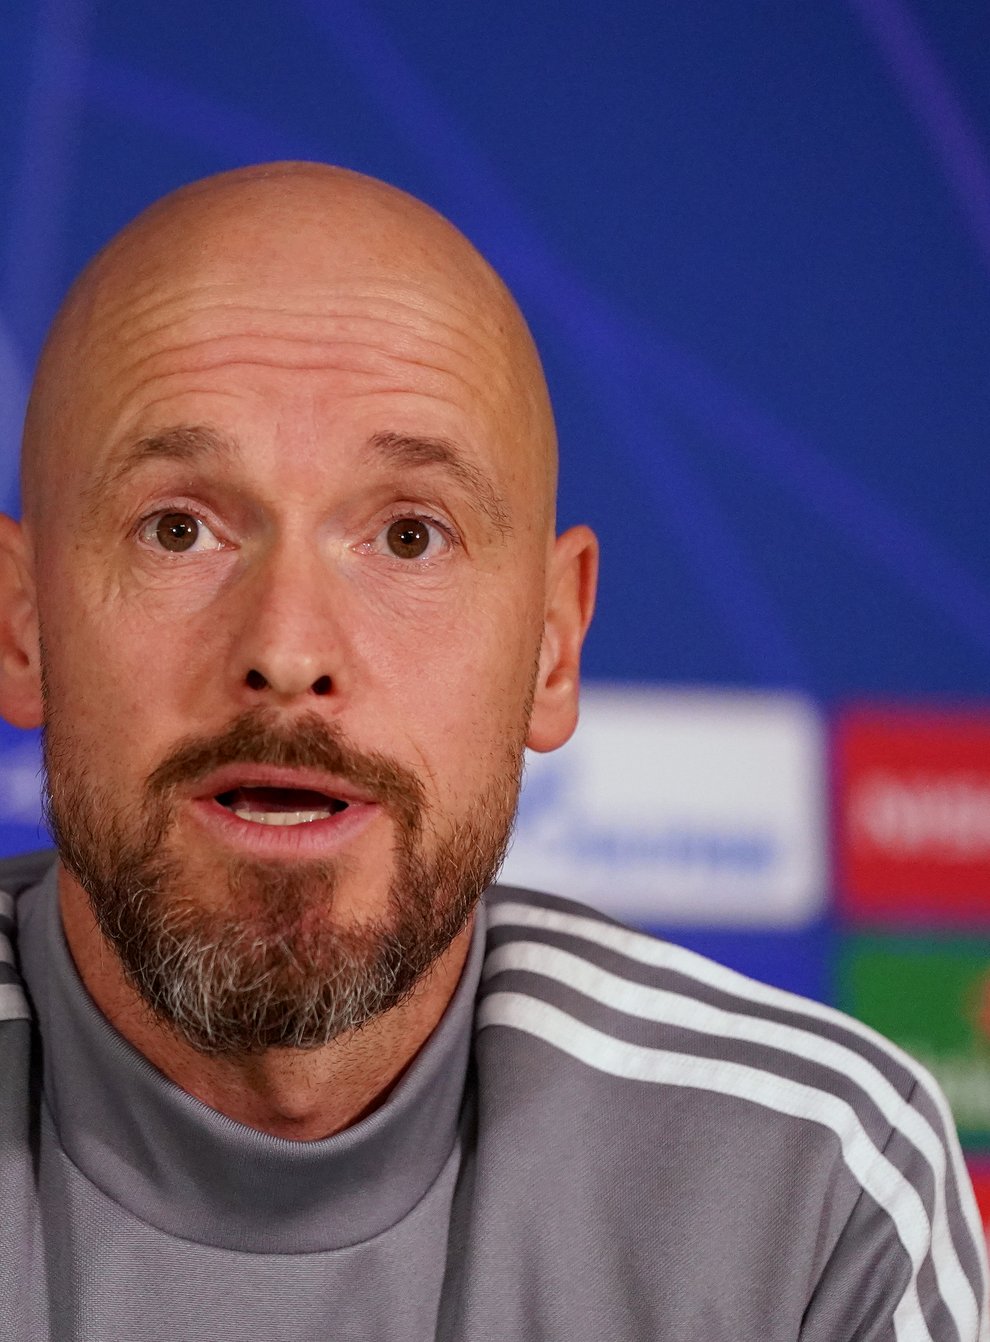 If Ajax coach Erik Ten Hag gets the top job at Manchester United, he could bring with him 22-year-old forward Antony, according to the Daily Telegraph (Tess Derry/PA)